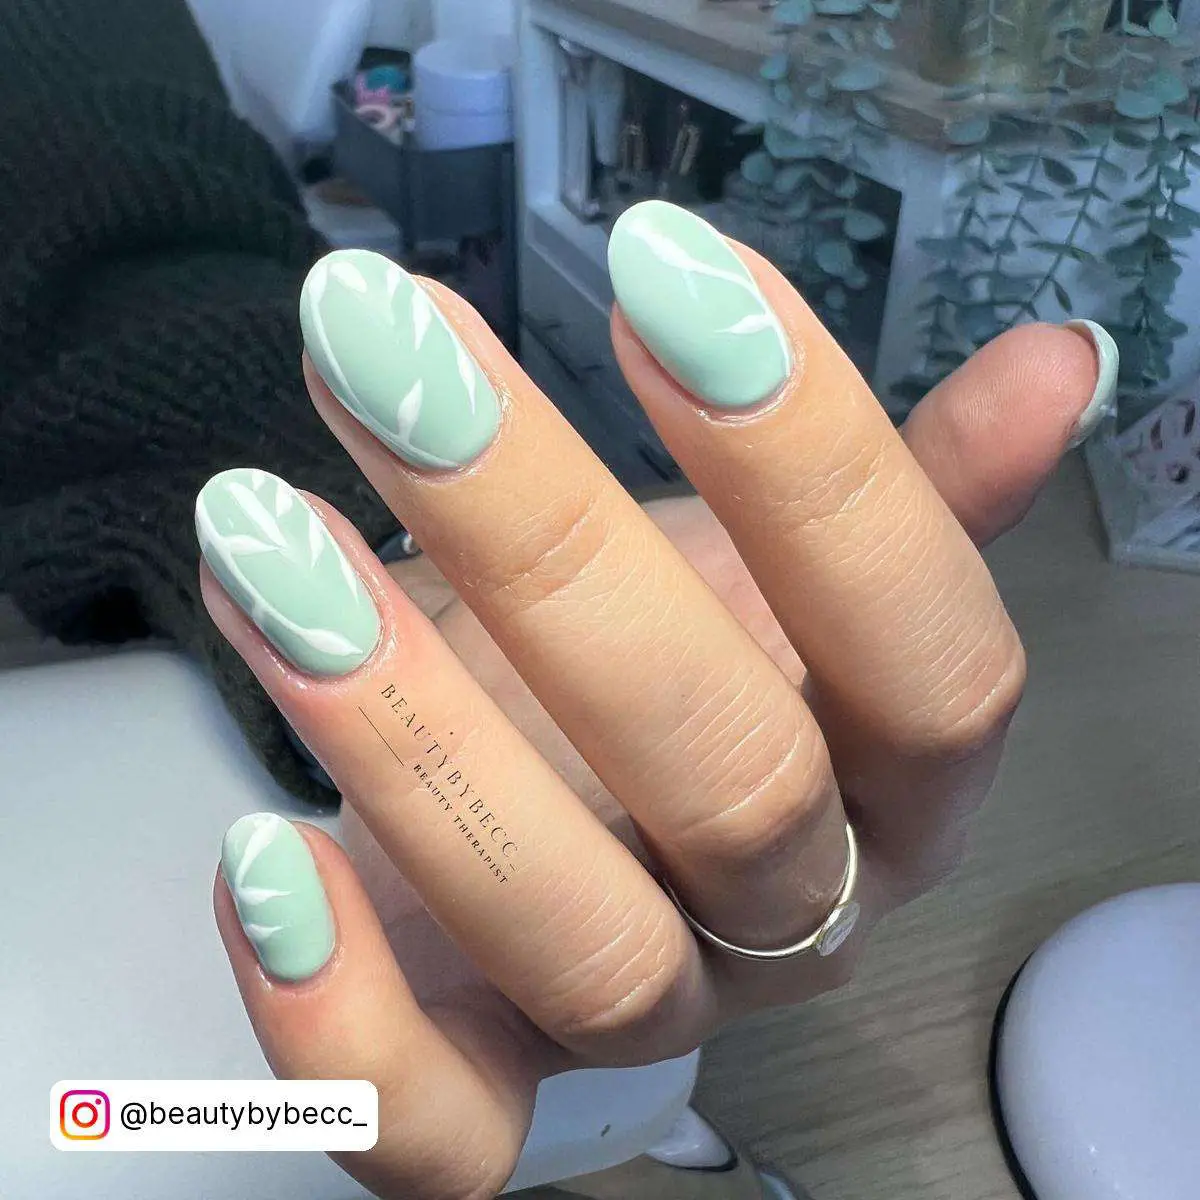 Sage Green Nails With Flowers